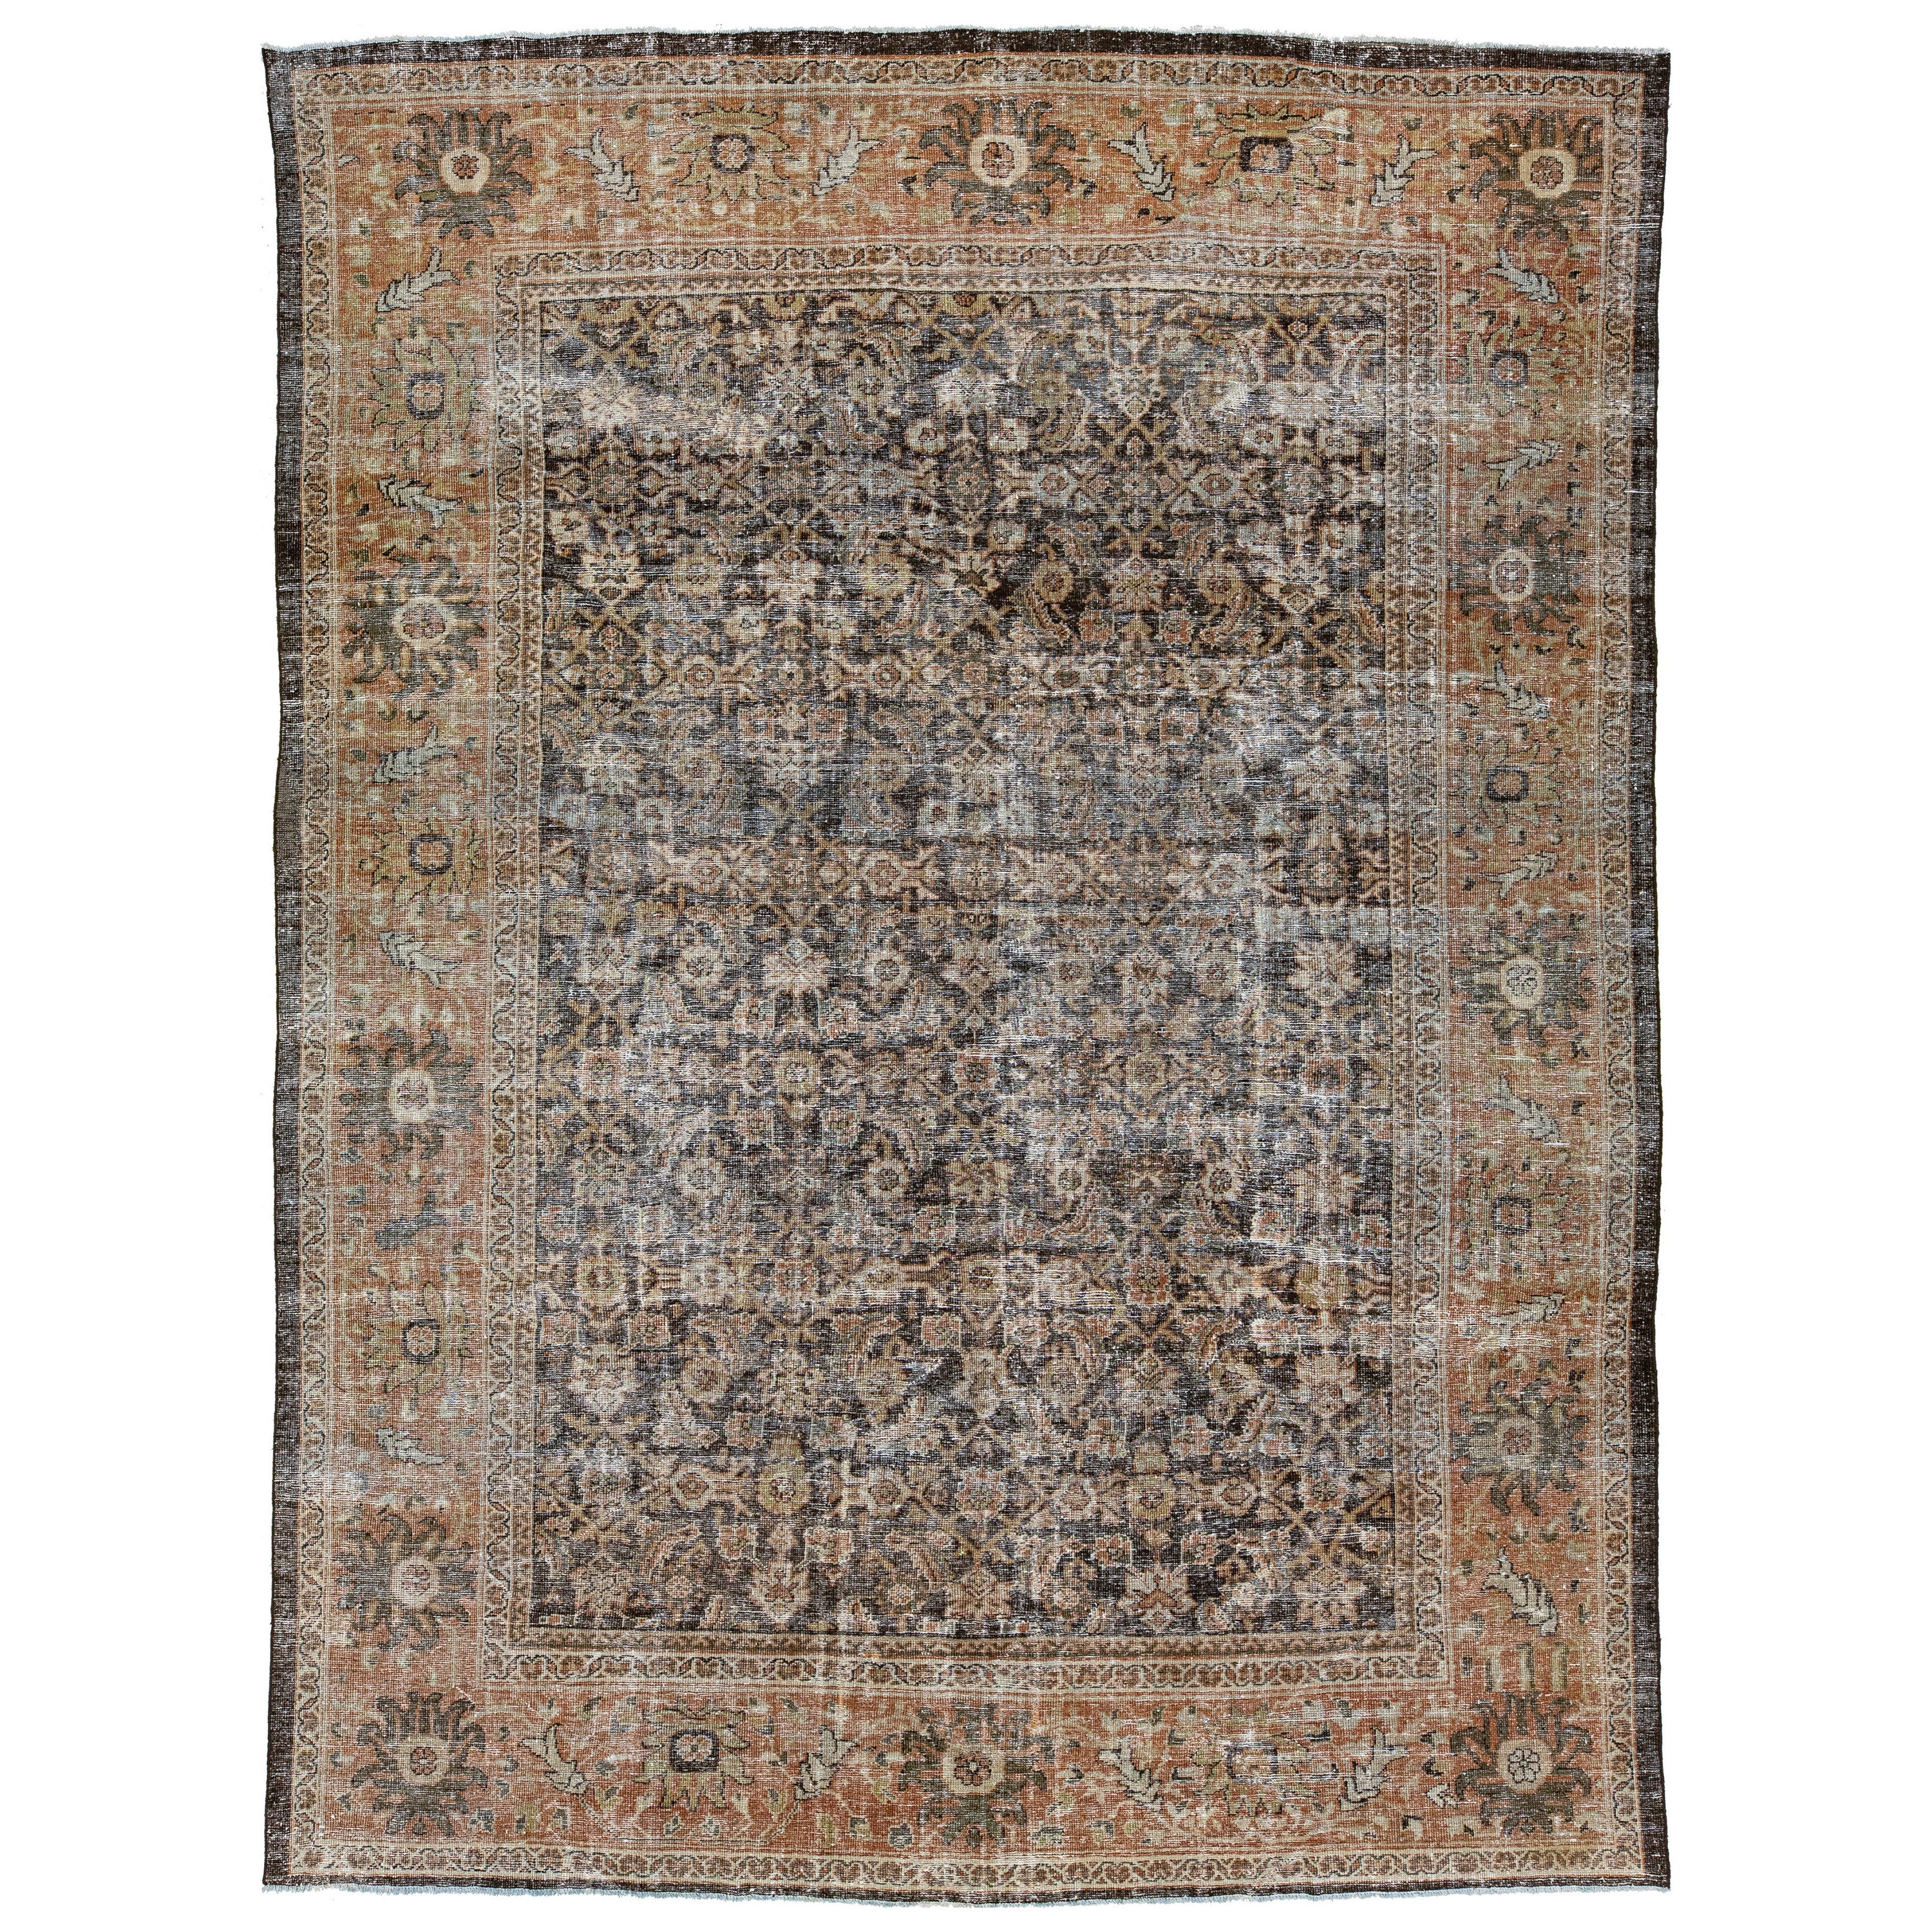 1900s Antique Persian Sultanabad Wool Rug In Brown With Allover Pattern For Sale